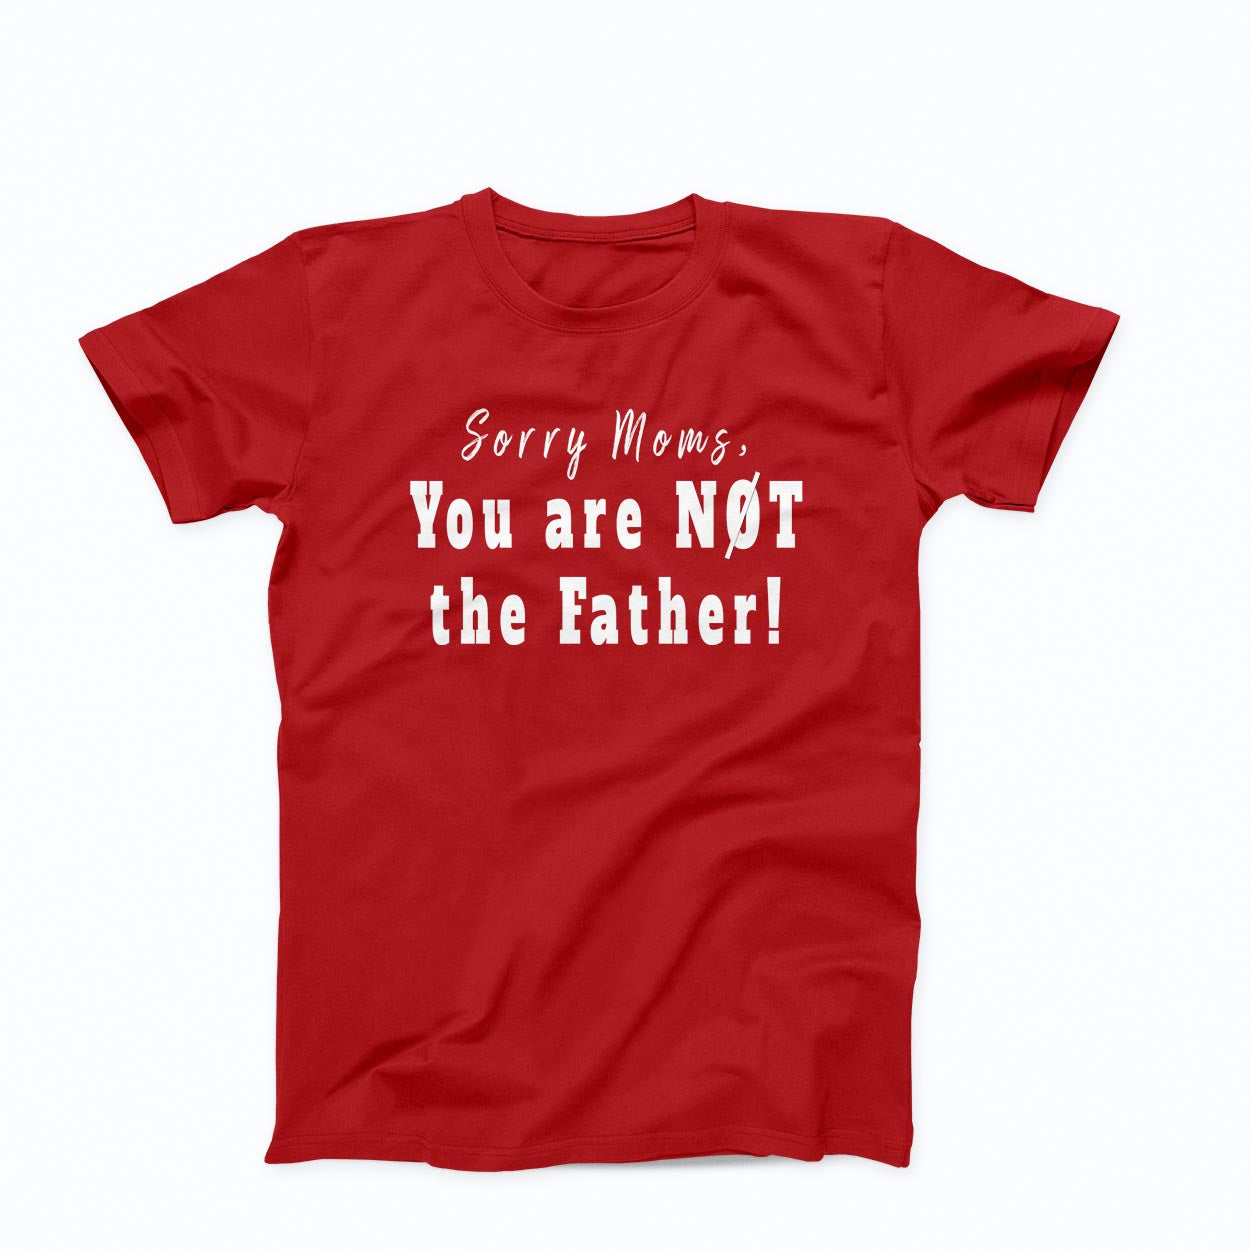 T-shirt:  Sorry Moms, You are Not the Father